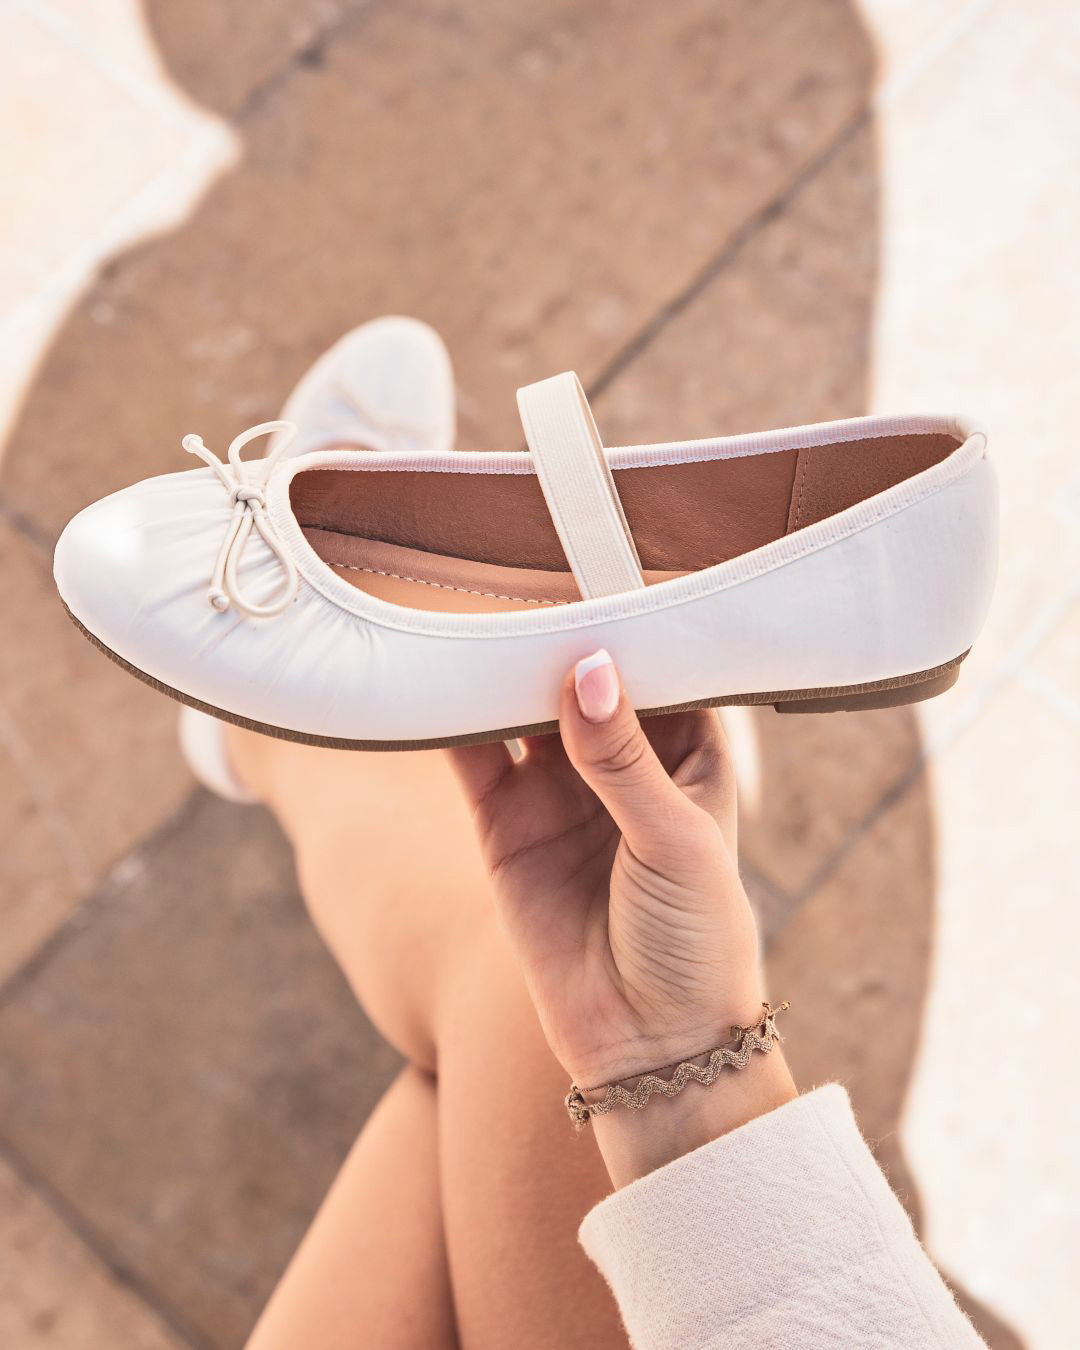 Ballerines femme plates blanches - Olympia - Casualmode.de